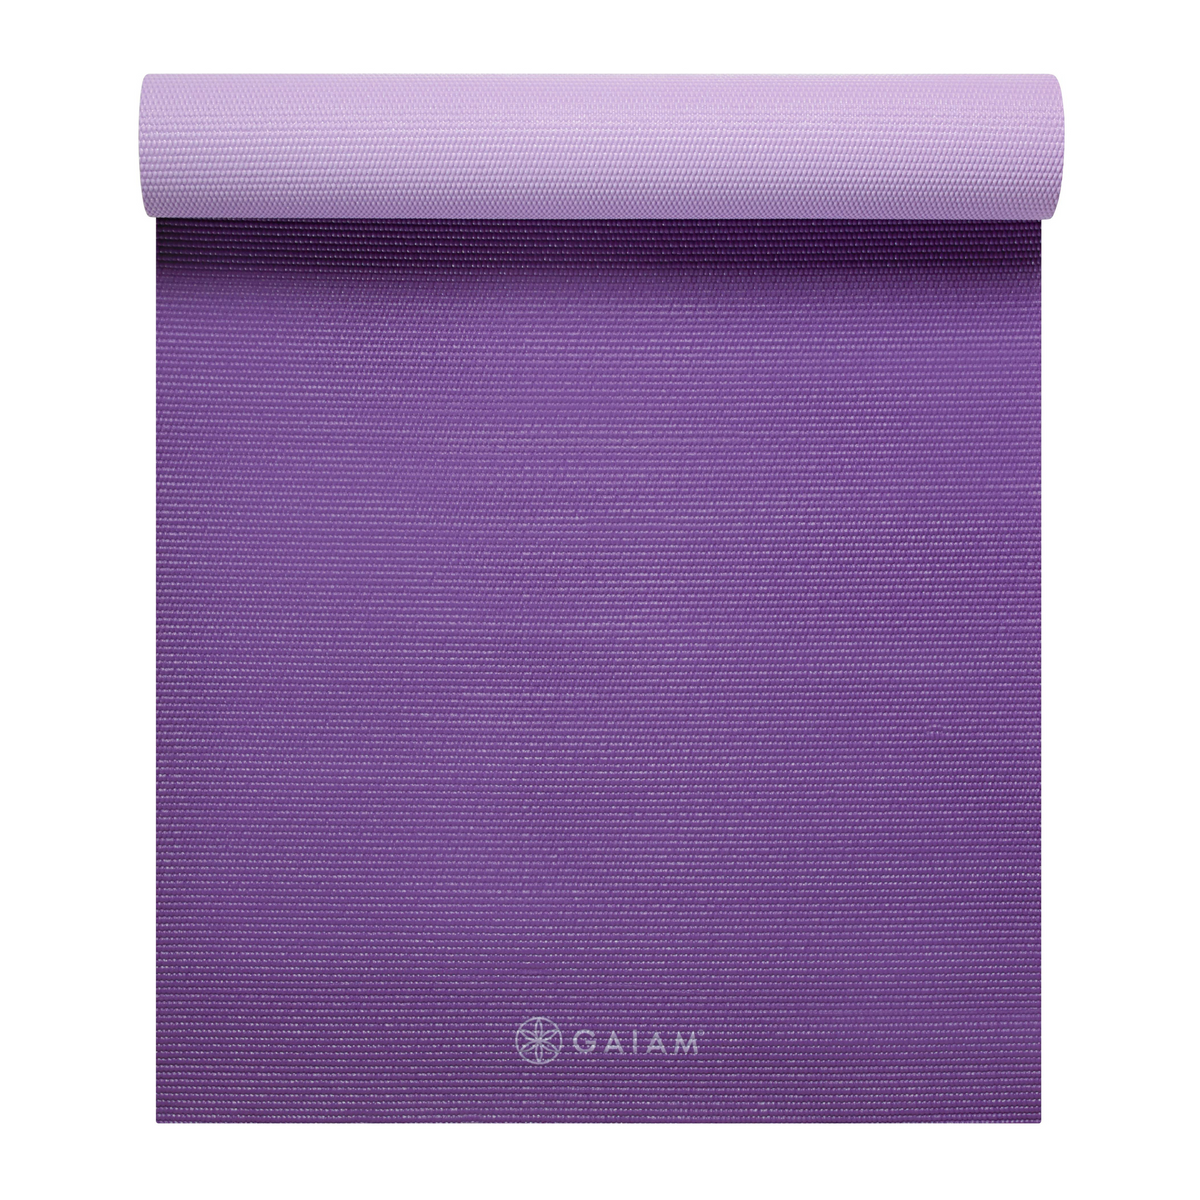 Gaiam Thisty Yoga Towel 2-Pack at